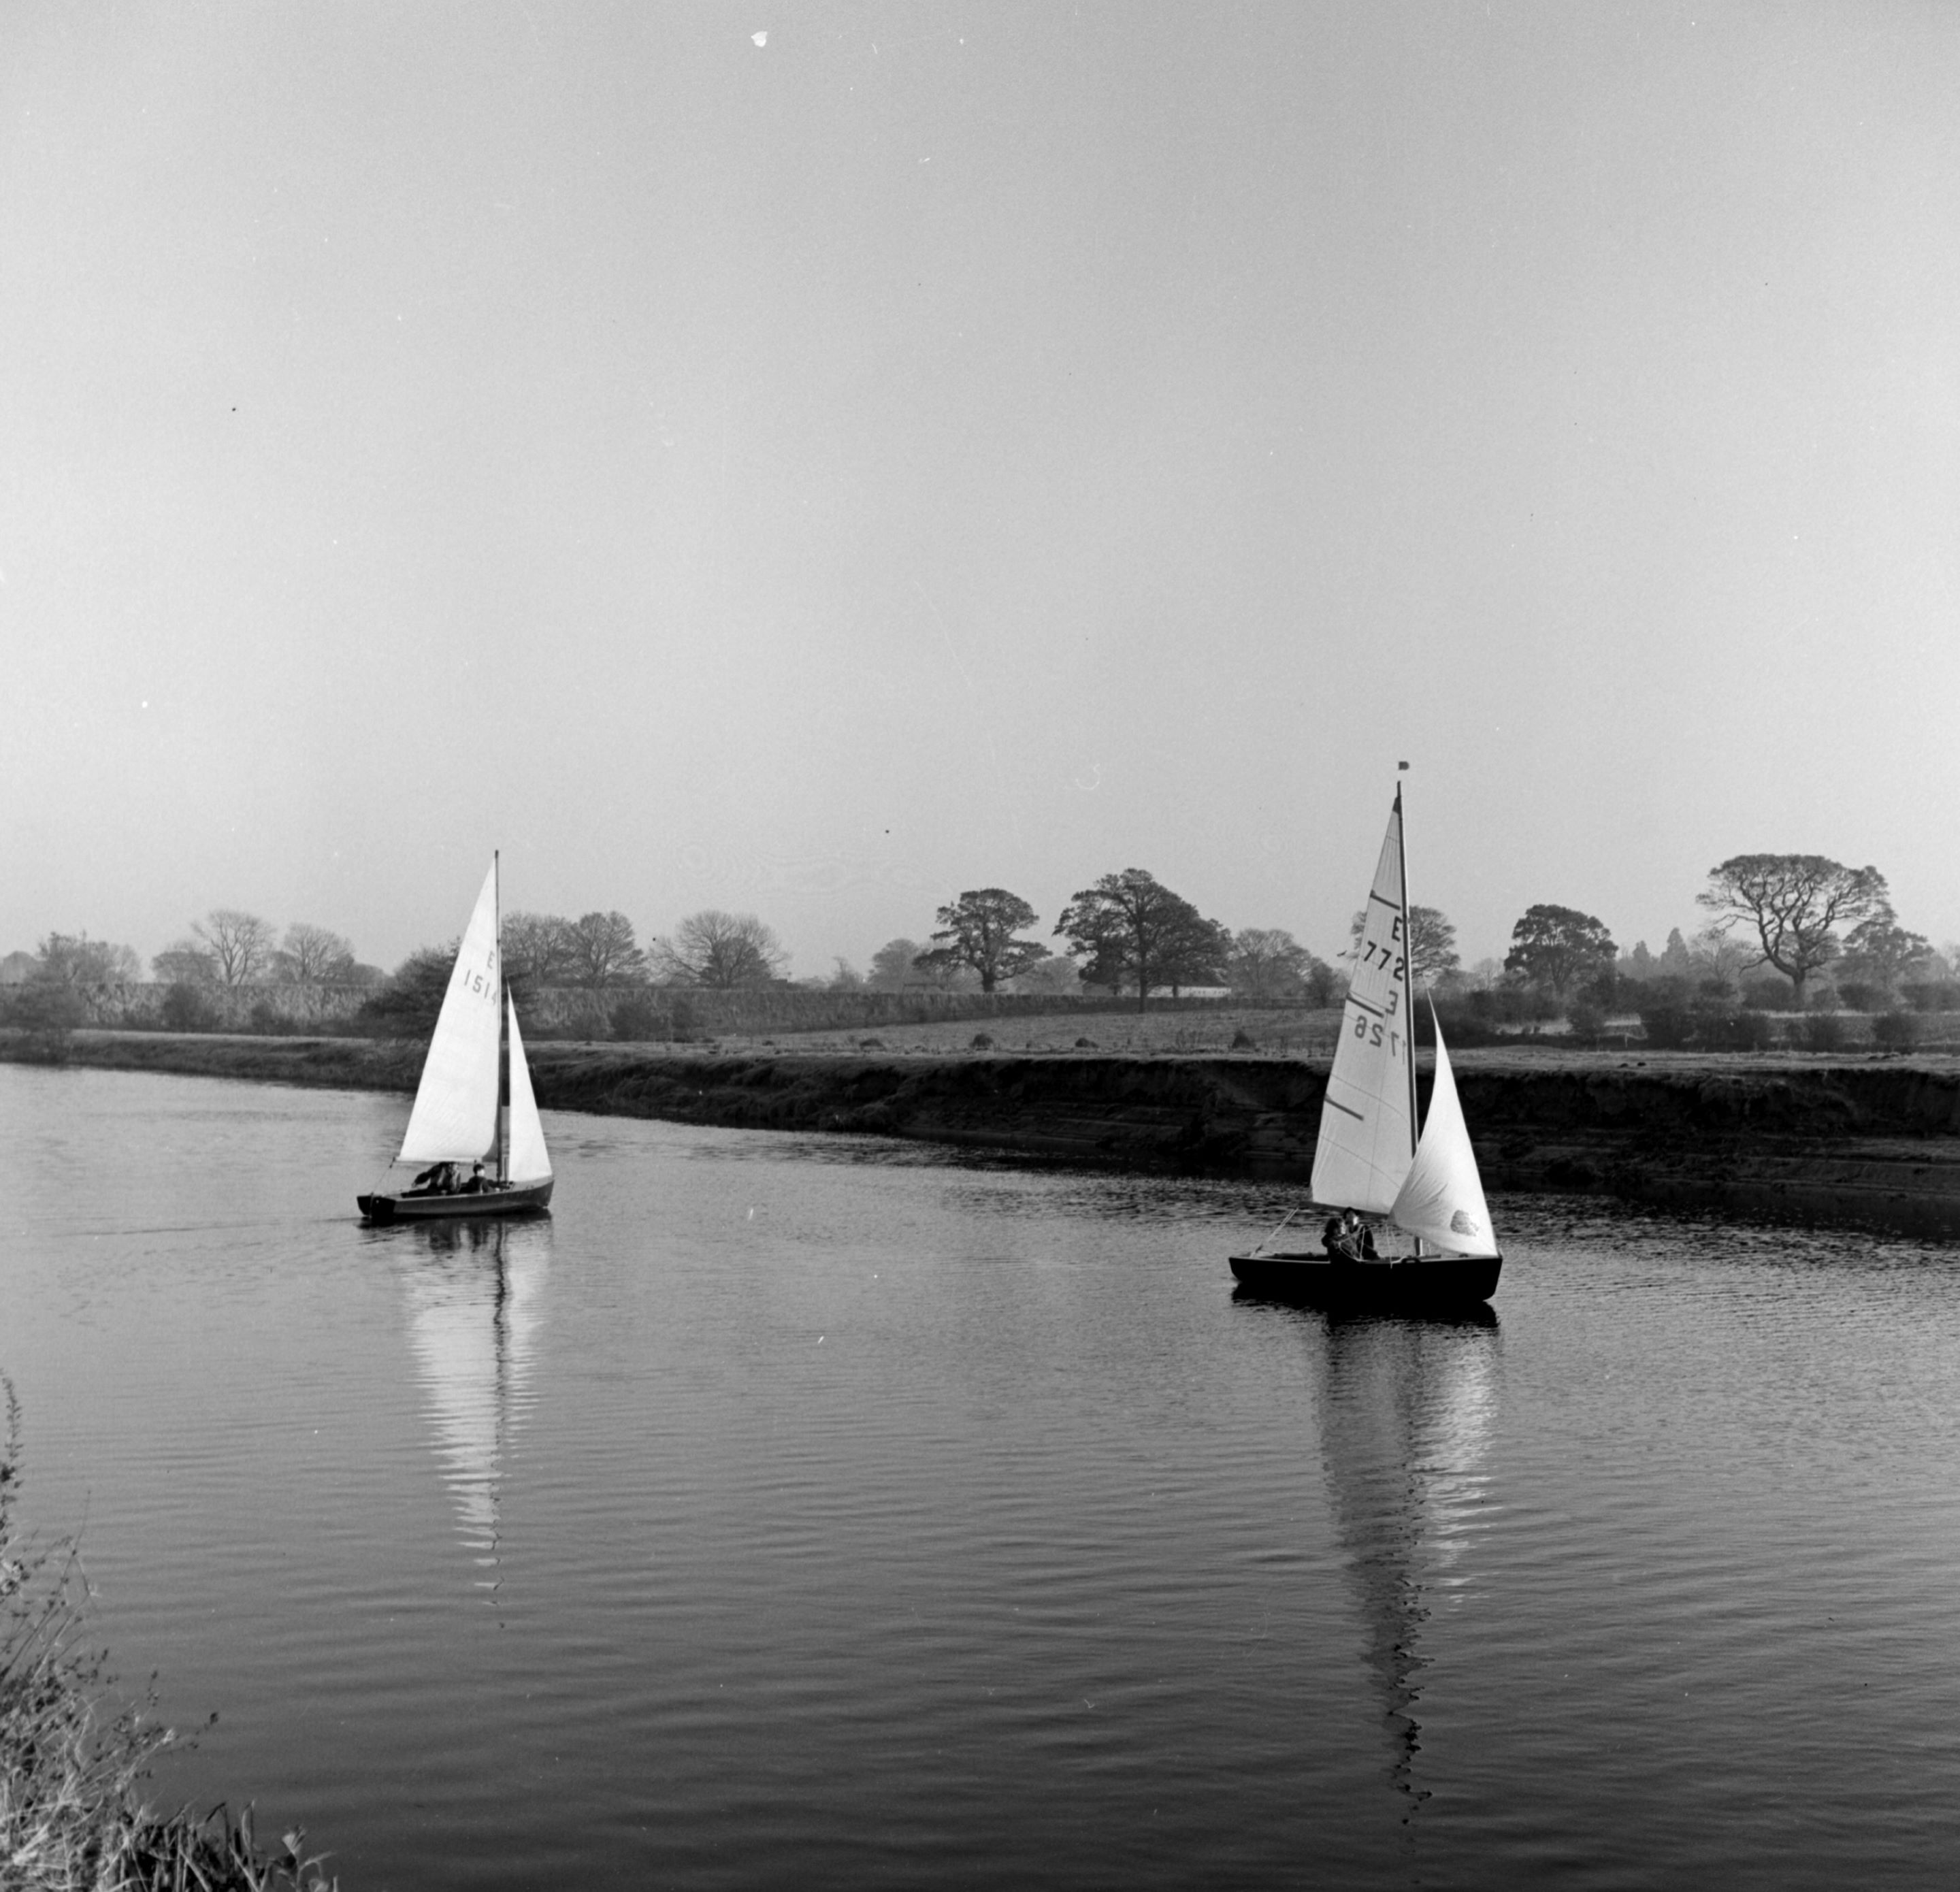 Sailing on the River Ure at Langthorpe (no date). From the Bertram Unné photographic collection.